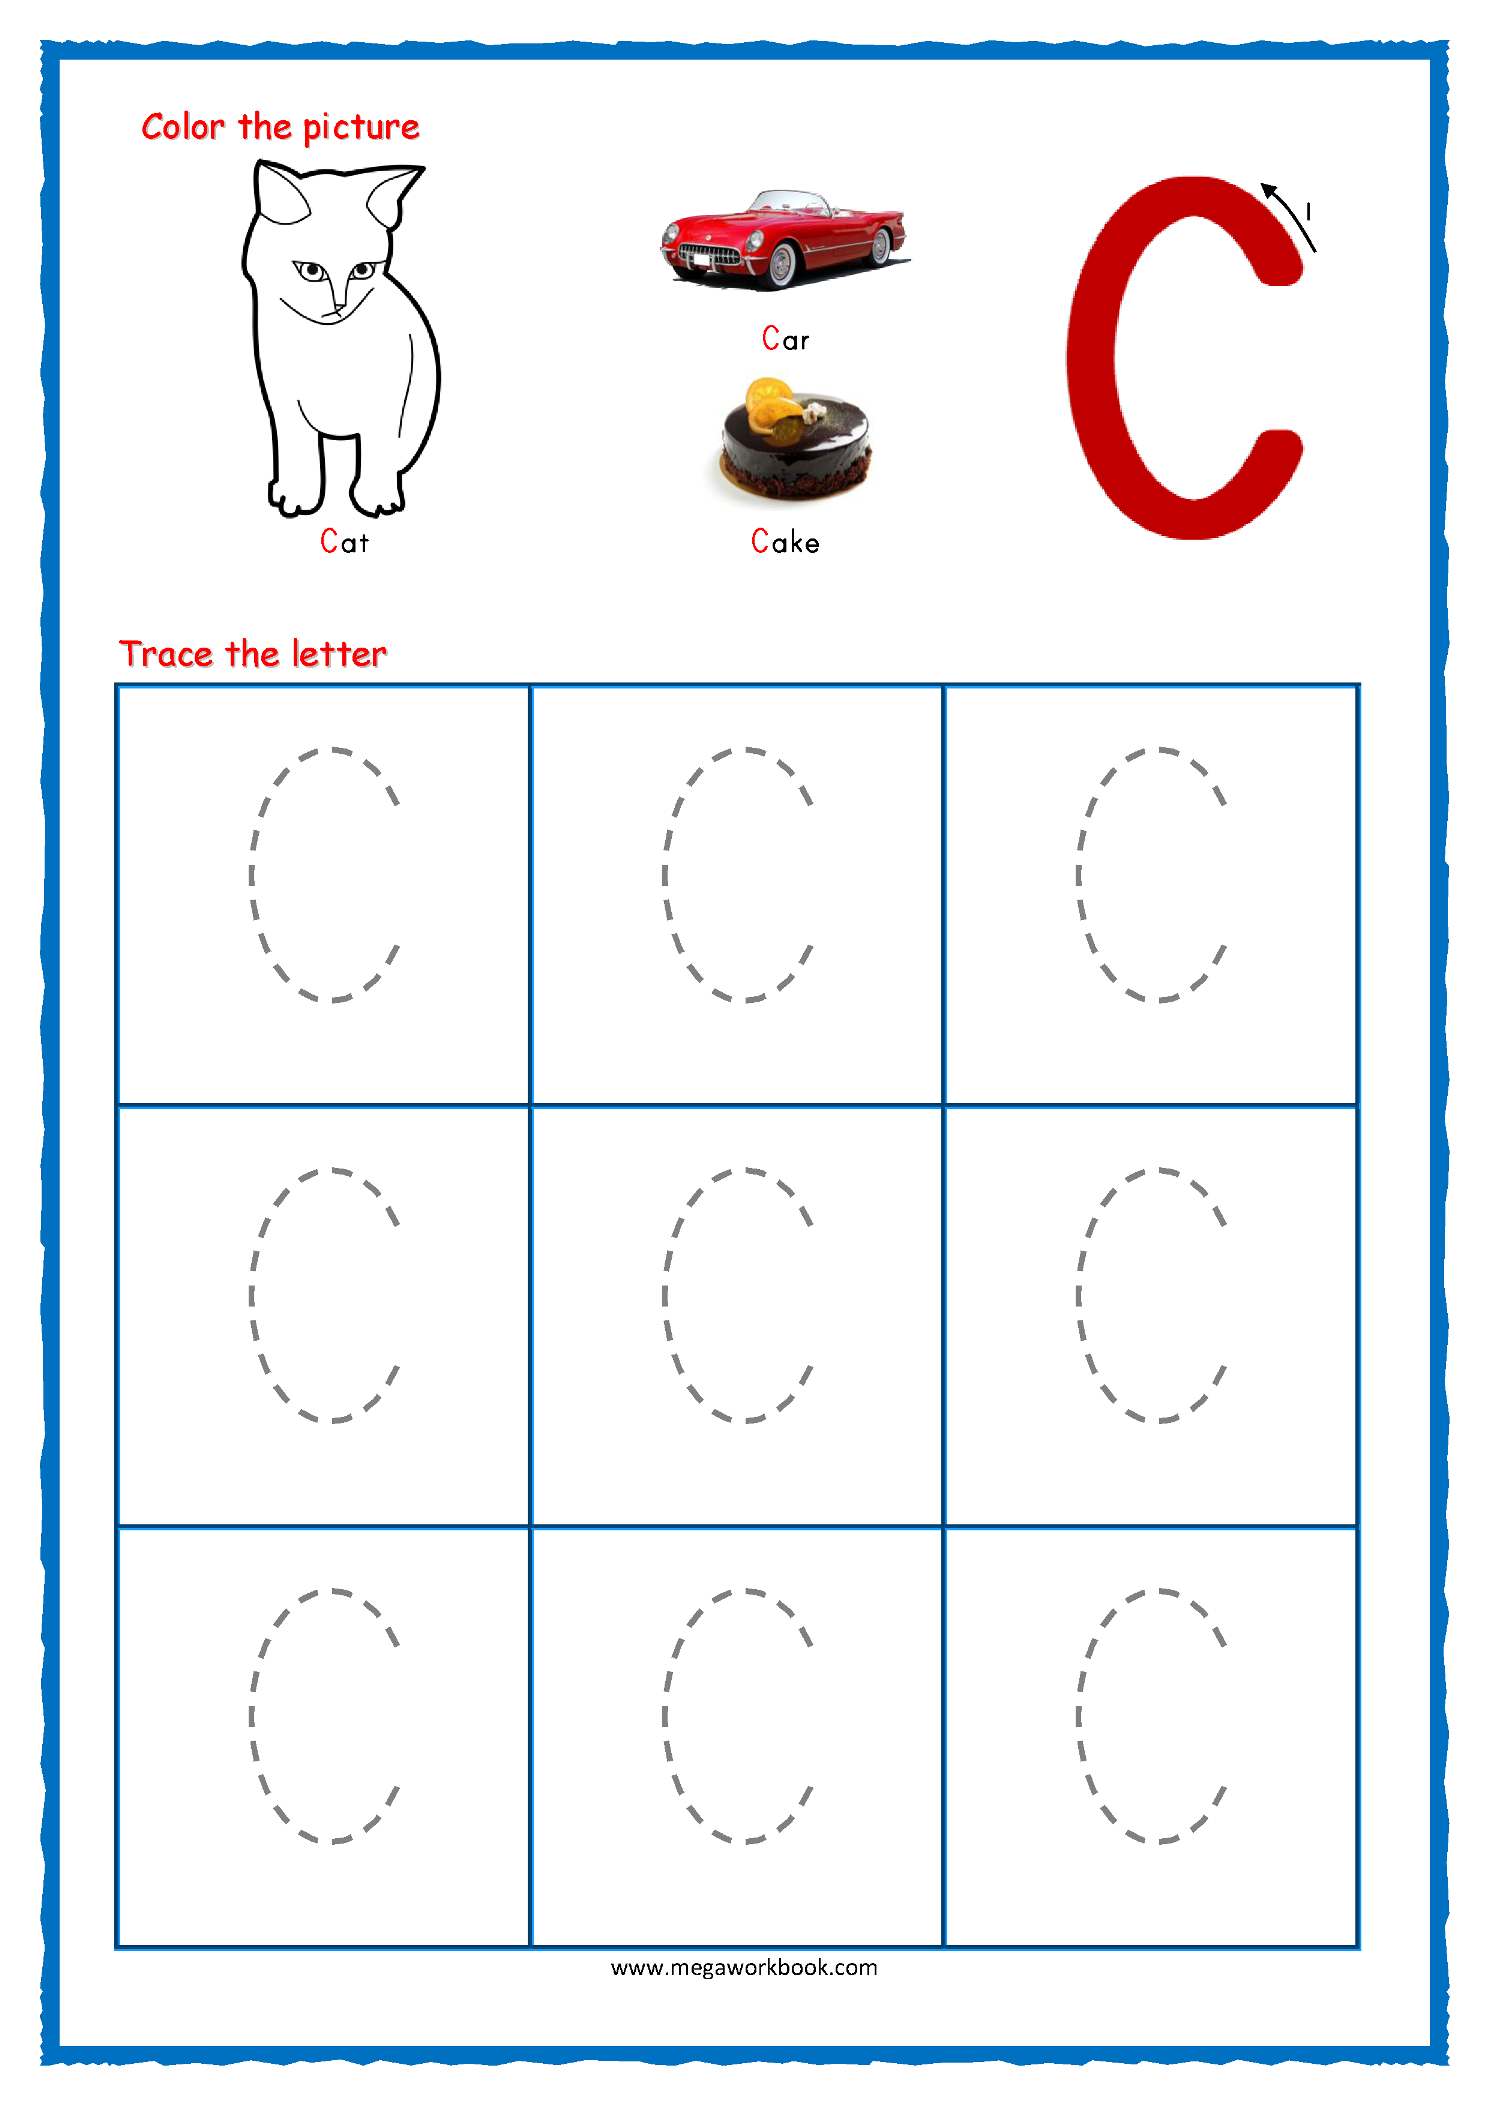 Tracing Letters - Alphabet Tracing - Capital Letters regarding Kindergarten Letter Tracing